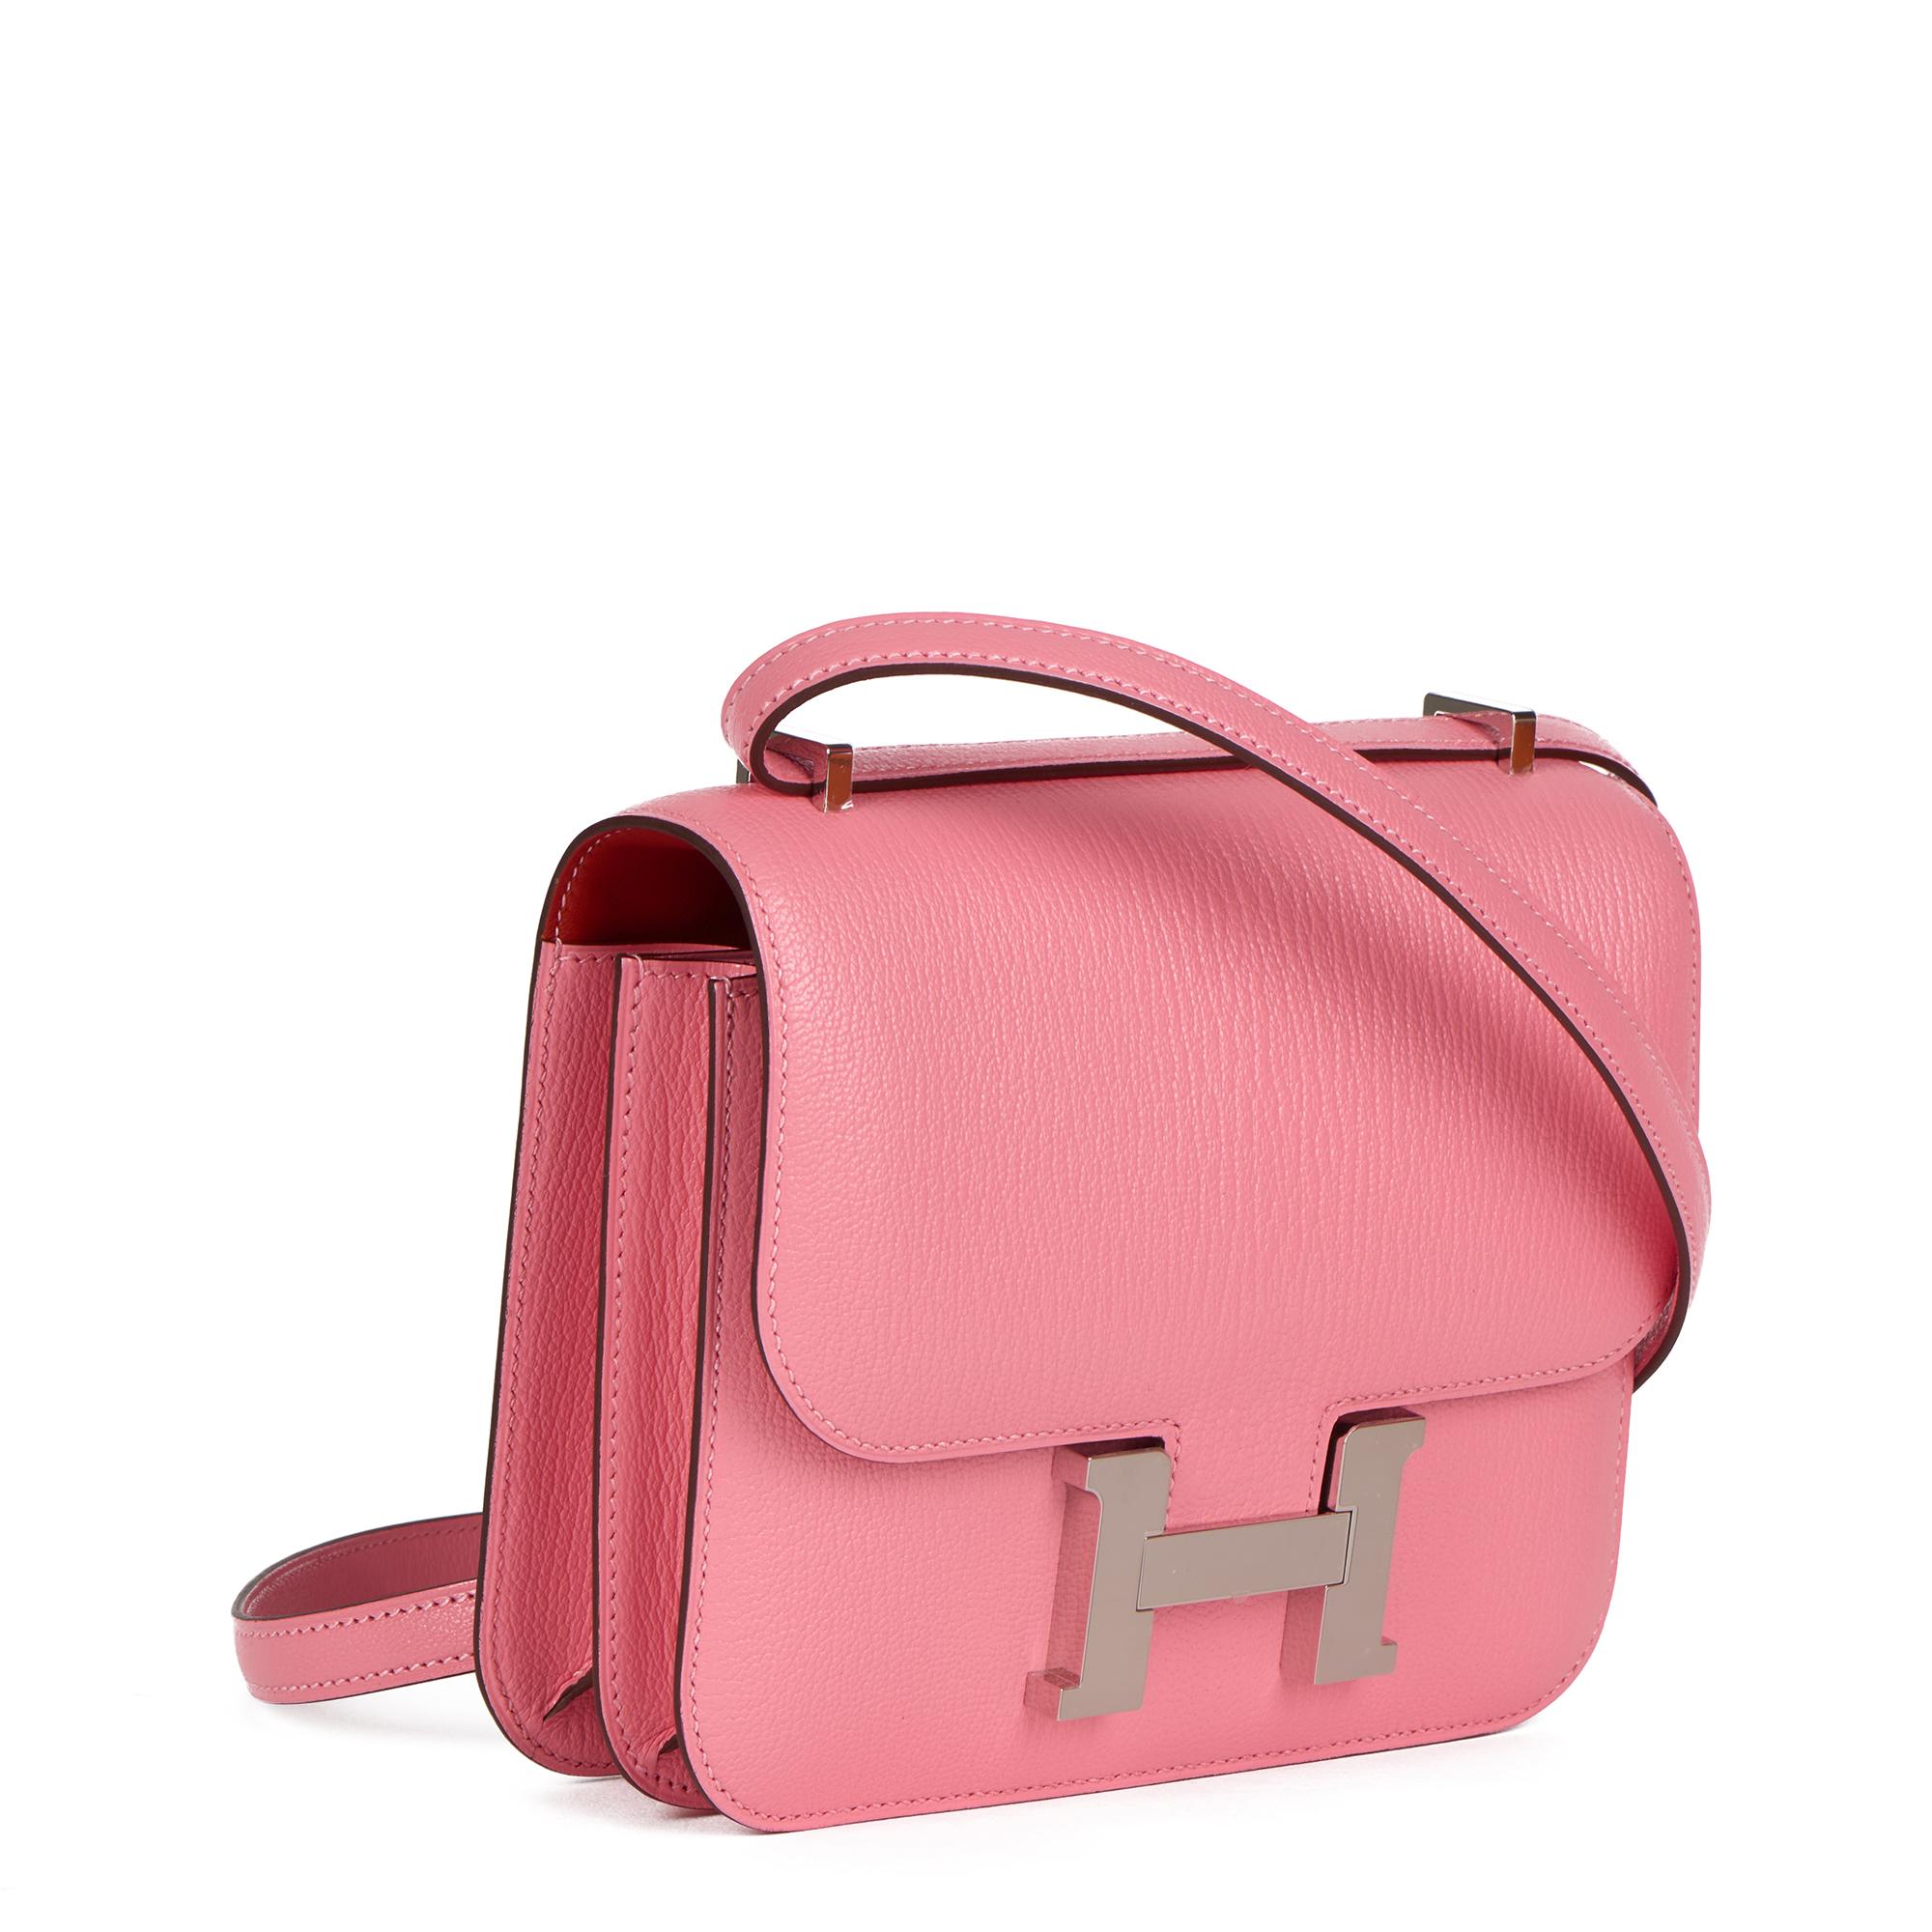 HERMÈS
Rose Confetti & Sanguine Chevre Mysore Leather Verso Constance 18

Serial Number: Z
Age (Circa): 2021
Accompanied By: Hermès Dust Bag, Box, Protective Felt, Invoice
Authenticity Details: Date Stamp (Made in France)
Gender: Ladies
Type: